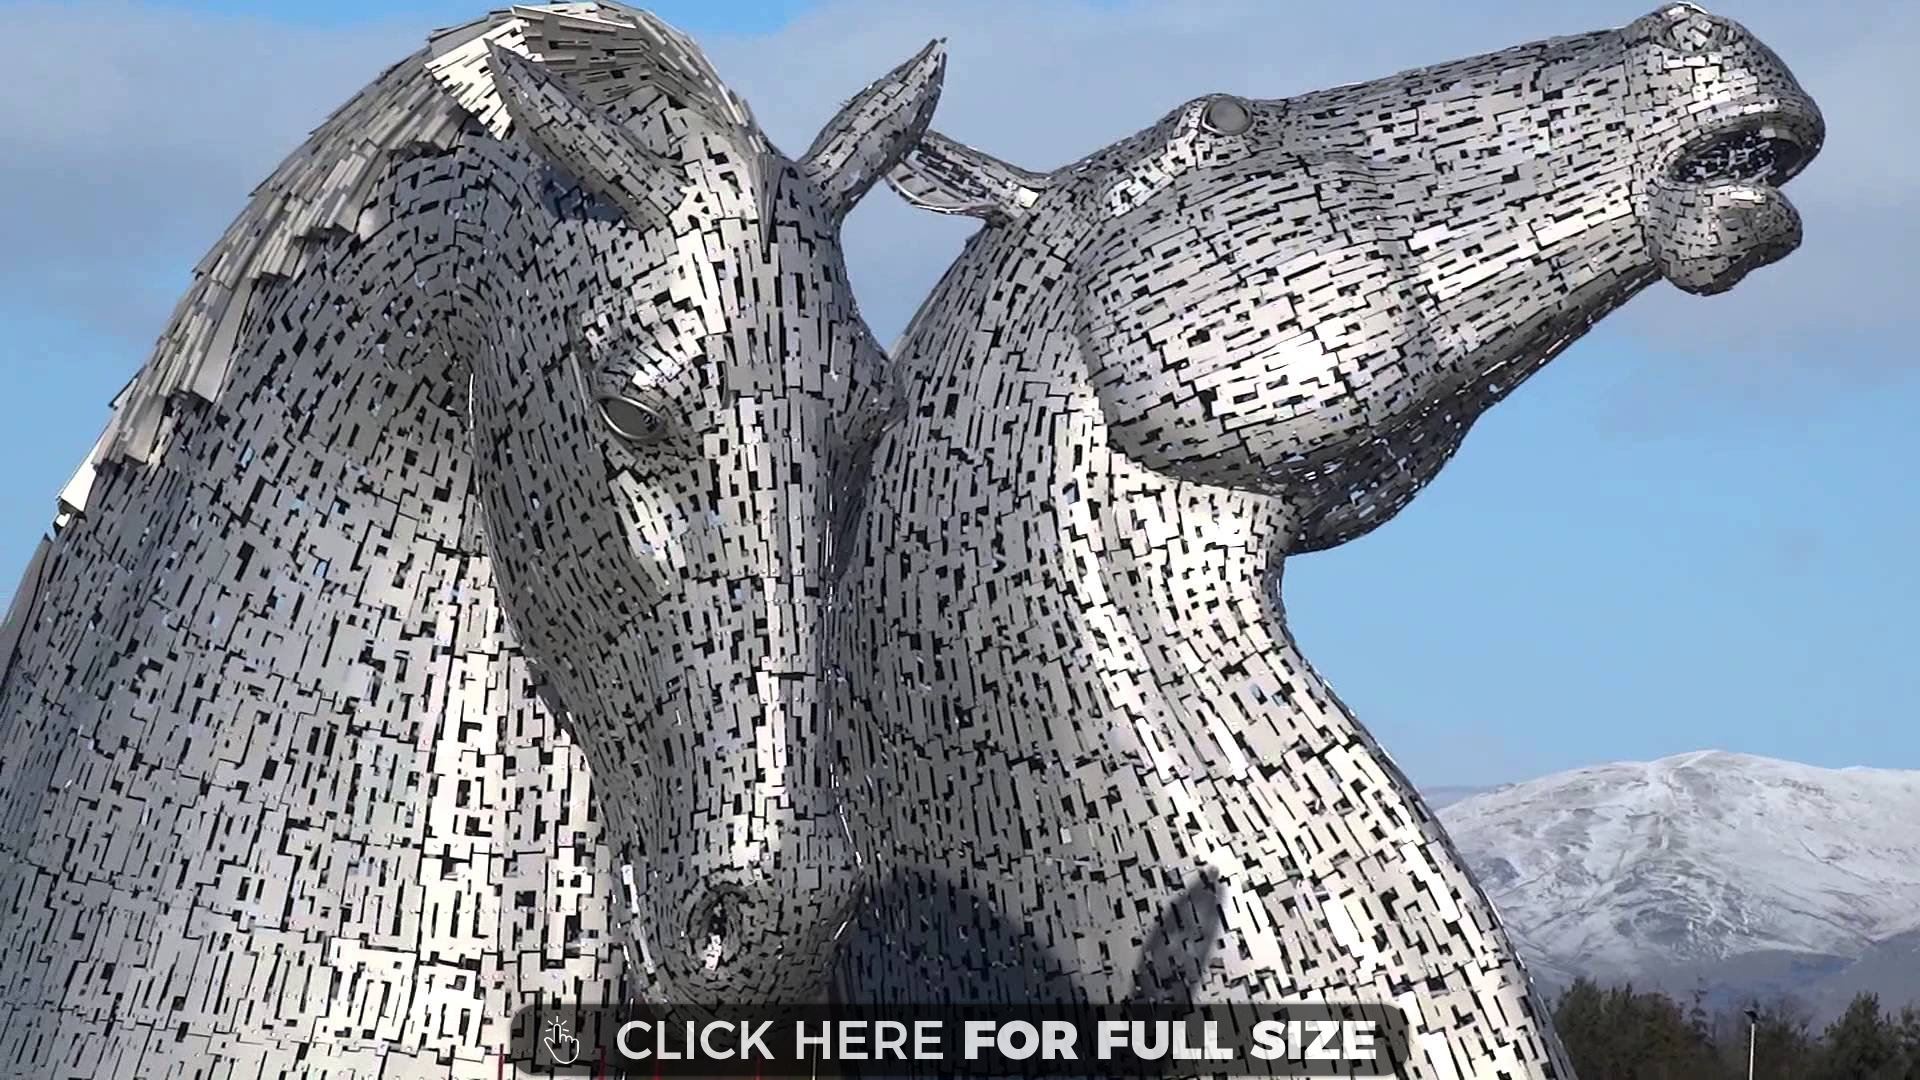 winter-kelpies-horse-sculptures-forth-and-clyde-canal-falkirk-scotland-wallpaper.jpg